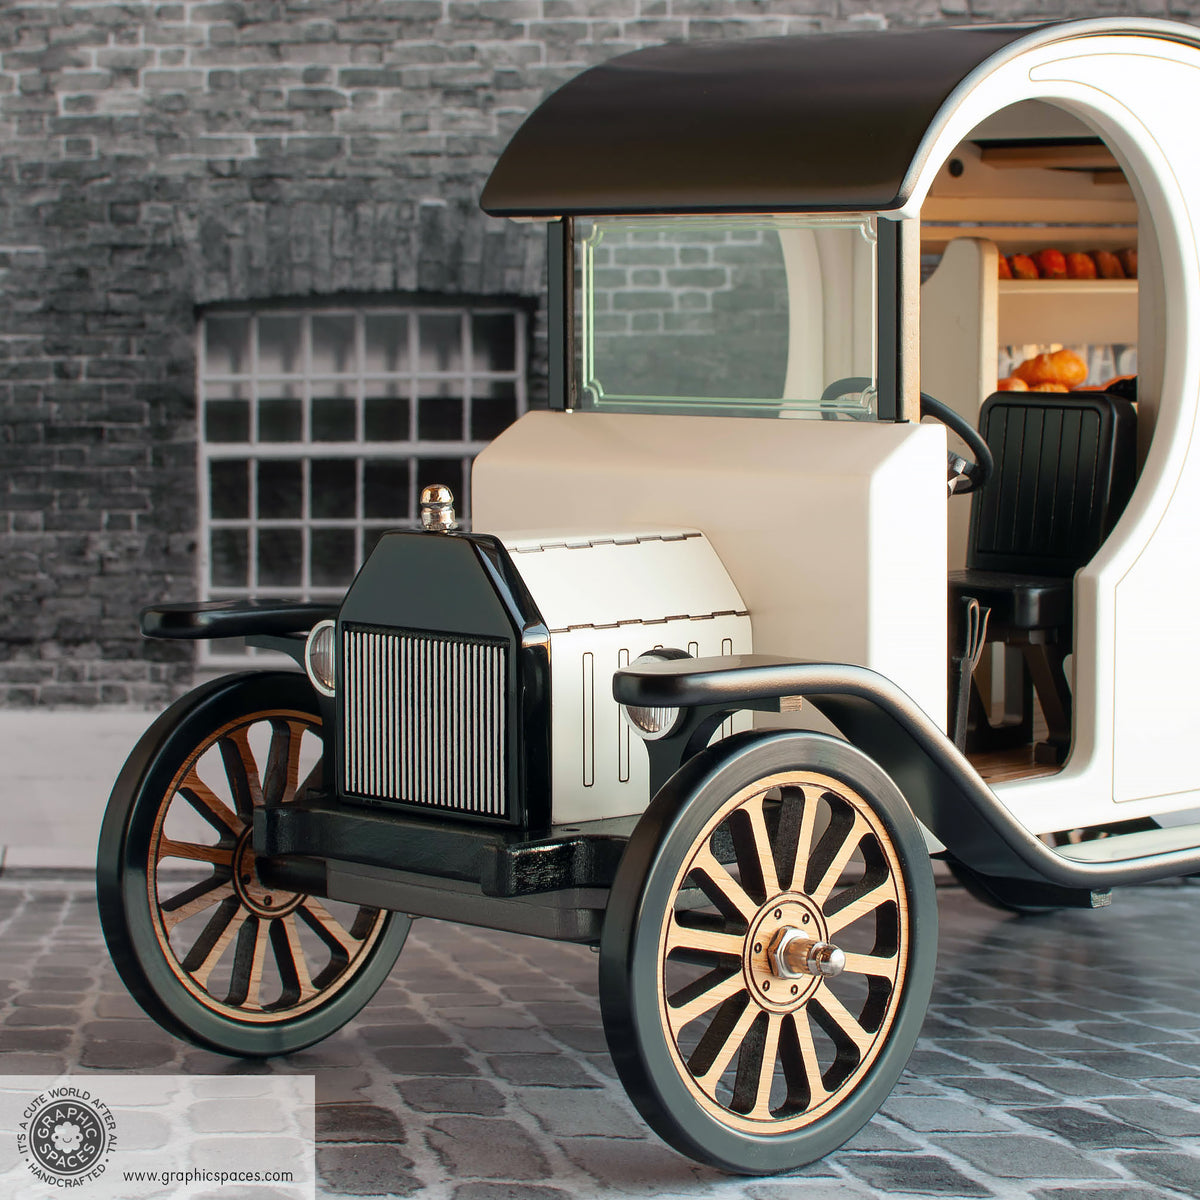 1:12 Scale Room Box White Bakery Shop Truck Model T C Cab. Front view detailing grille, headlights and seat.